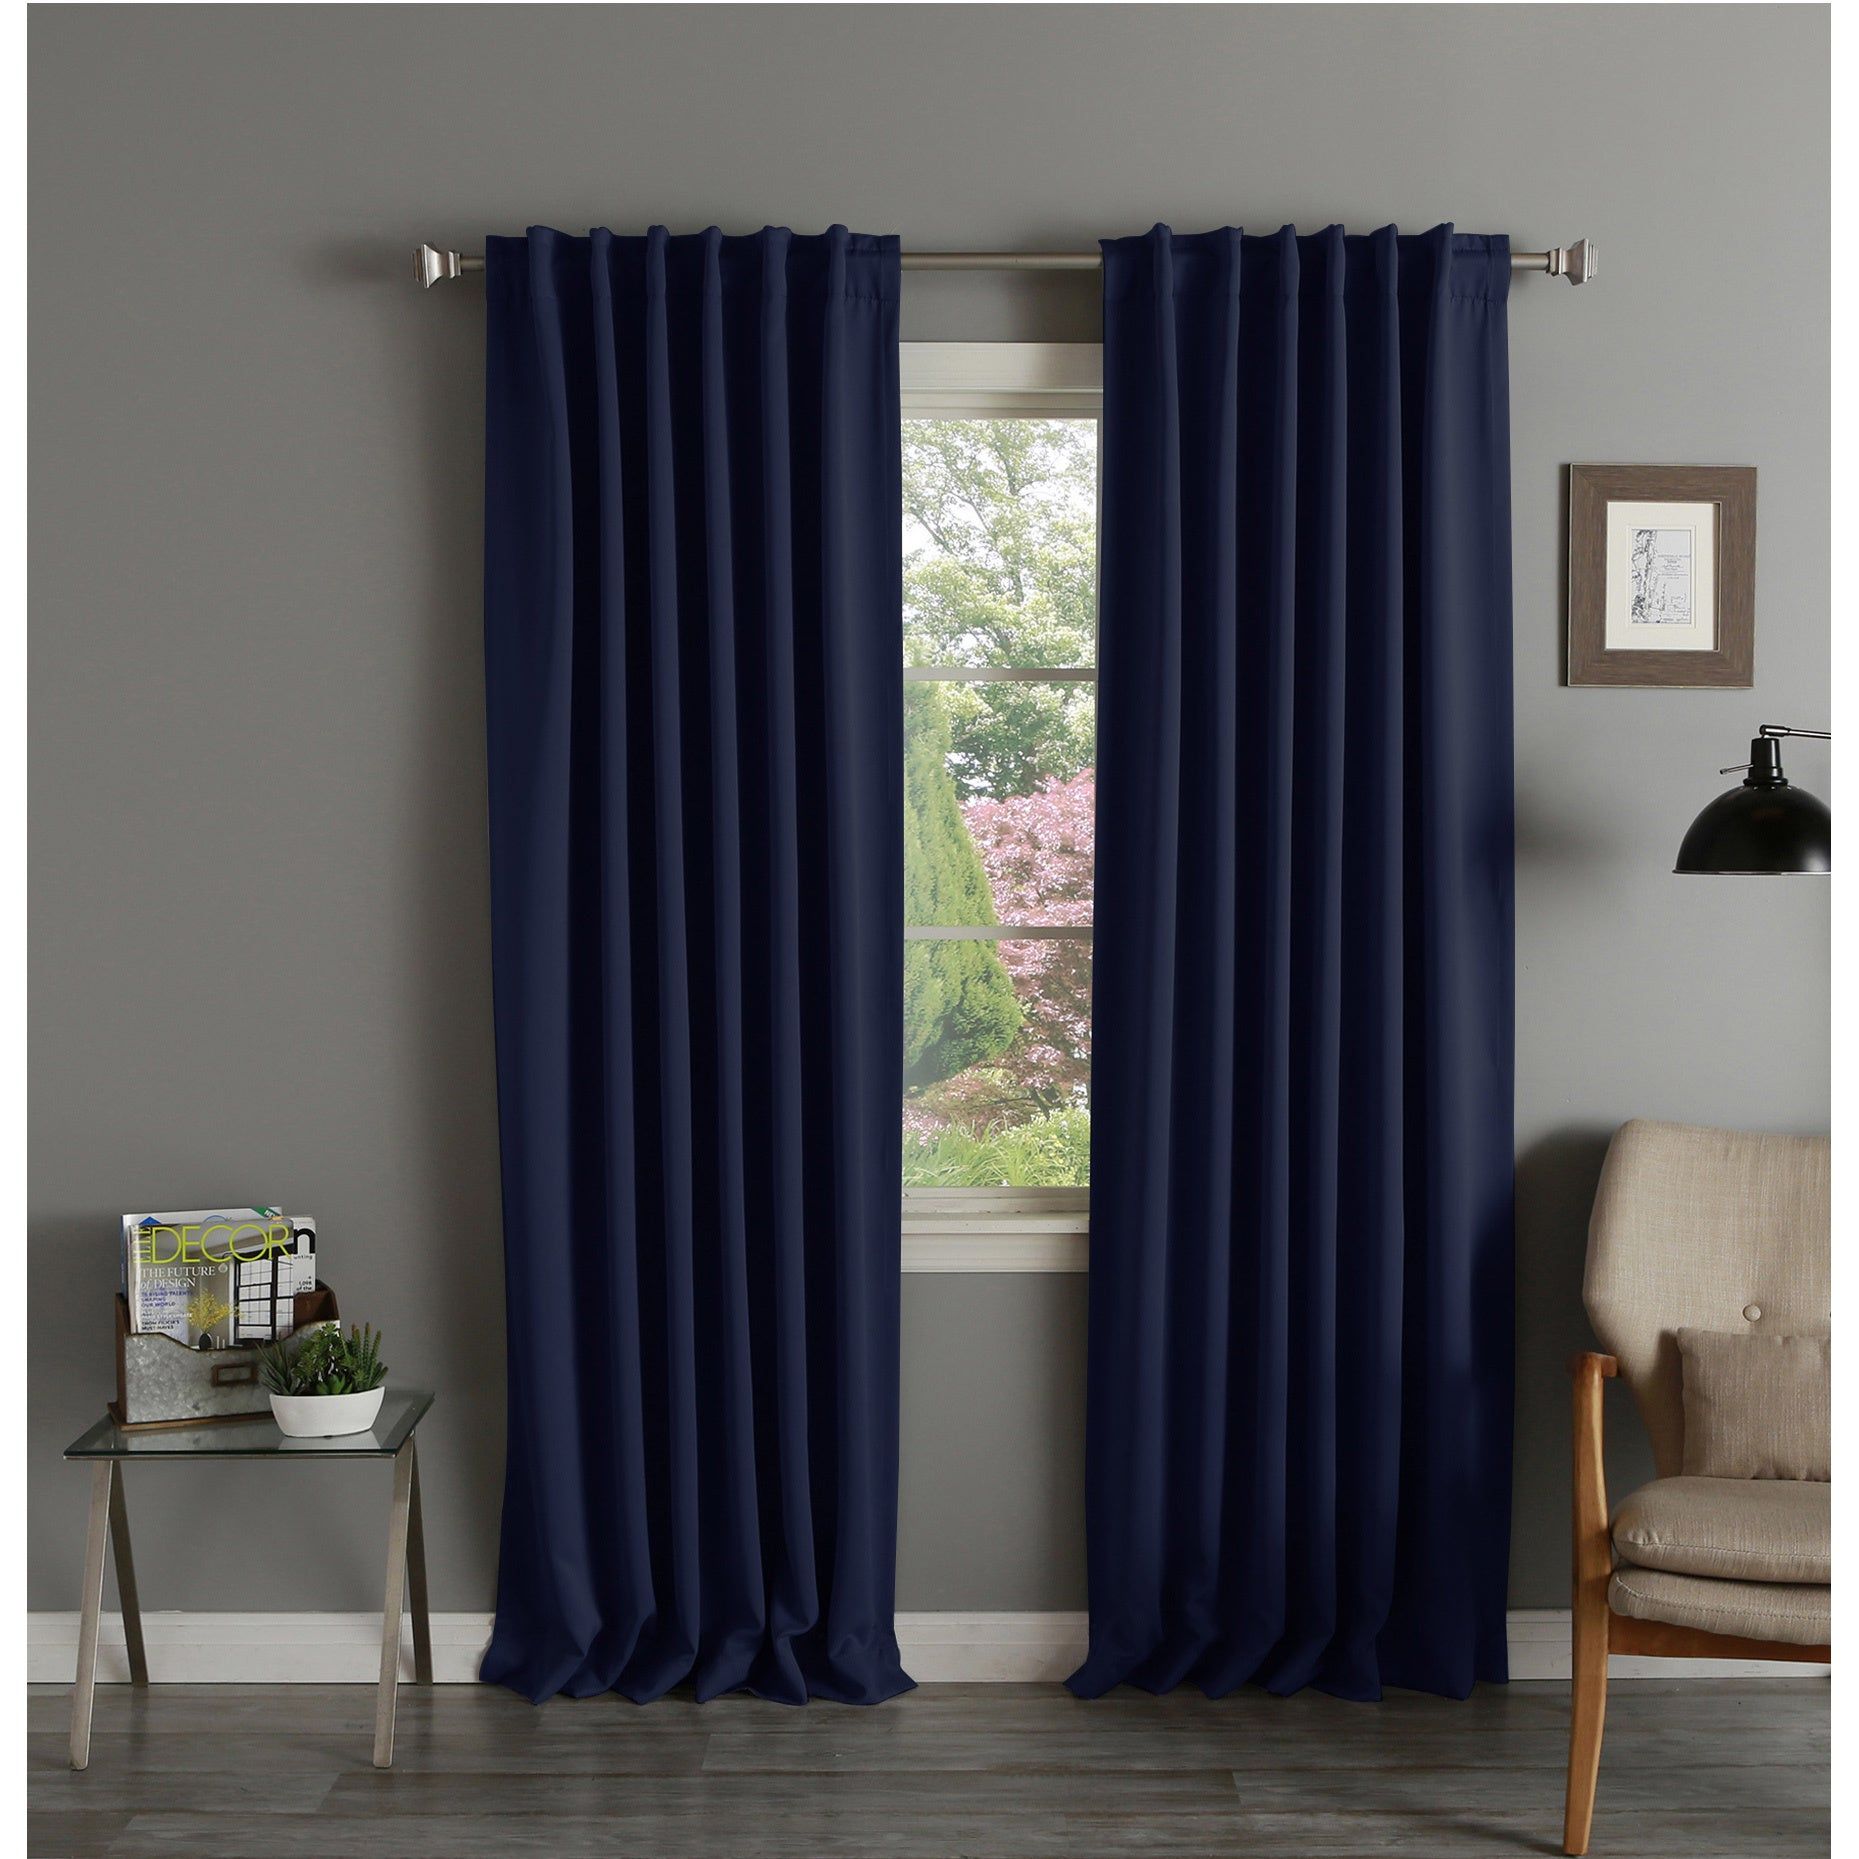 Aurora Home Thermal Rod Pocket 96 Inch Blackout Curtain Panel Pair – 52 X 96 Pertaining To Thermal Rod Pocket Blackout Curtain Panel Pairs (View 30 of 30)